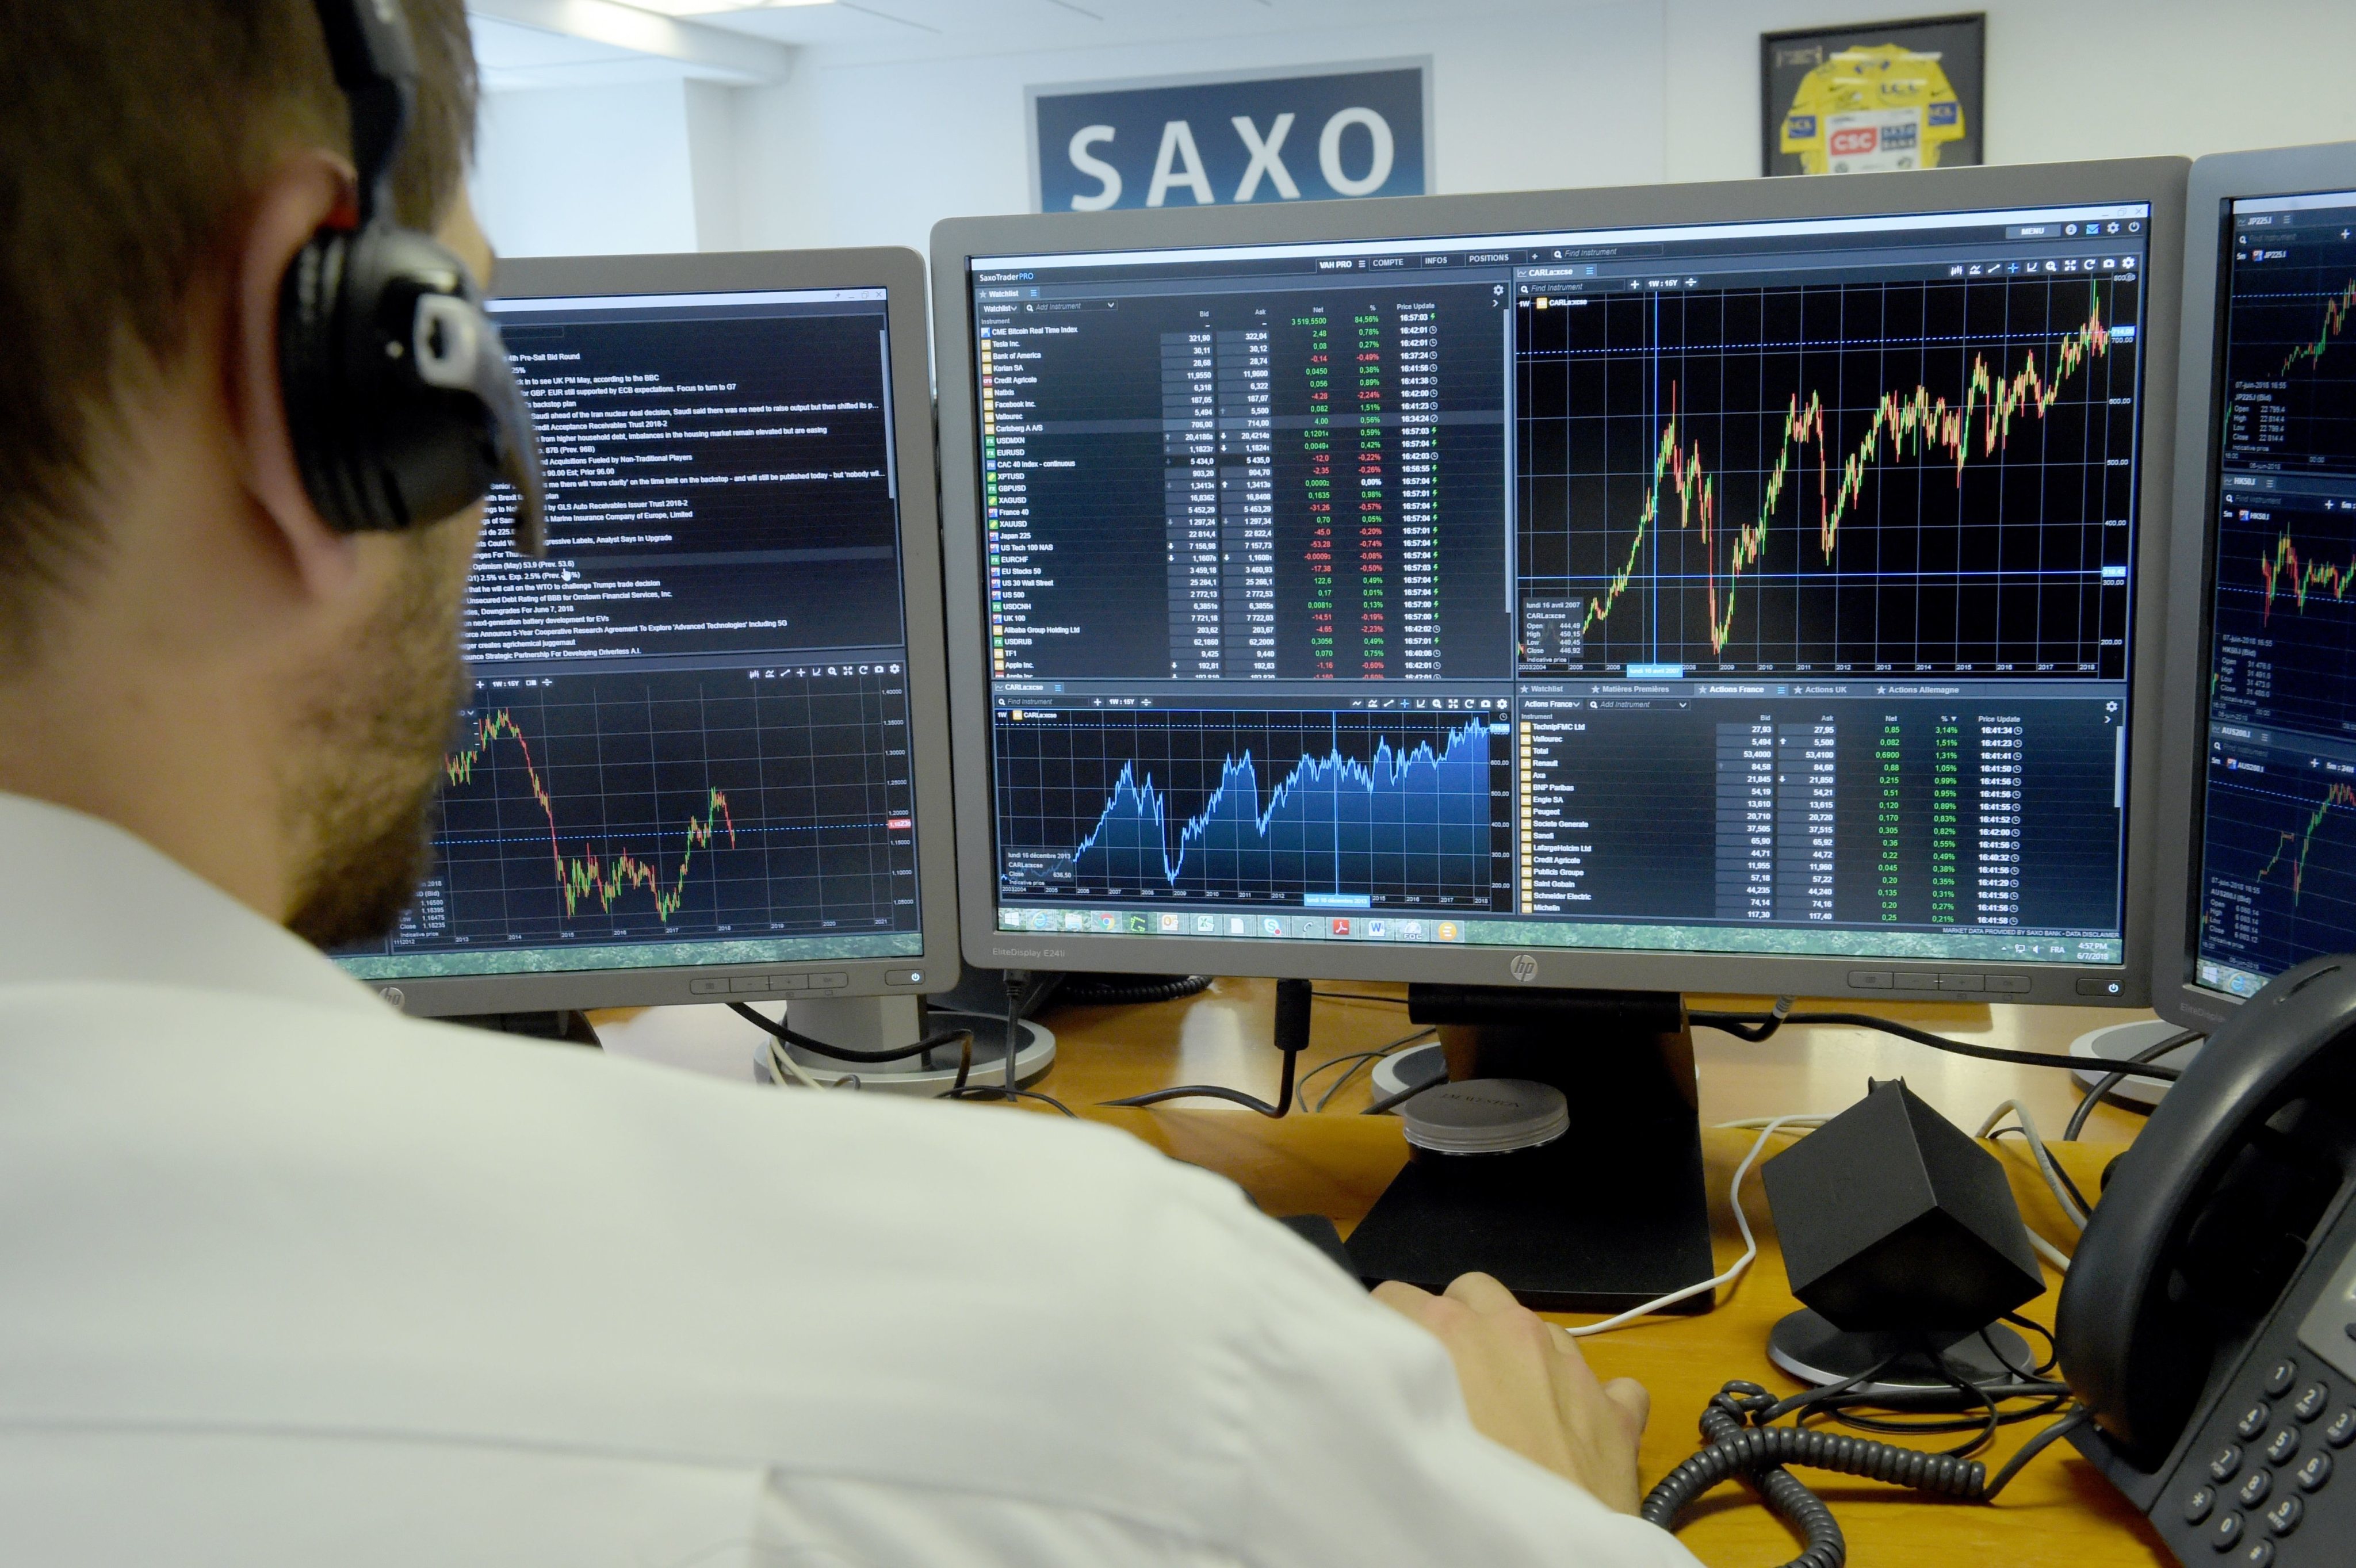 FRANCE-INVESTMENT-TRADING-SAXO-BANK